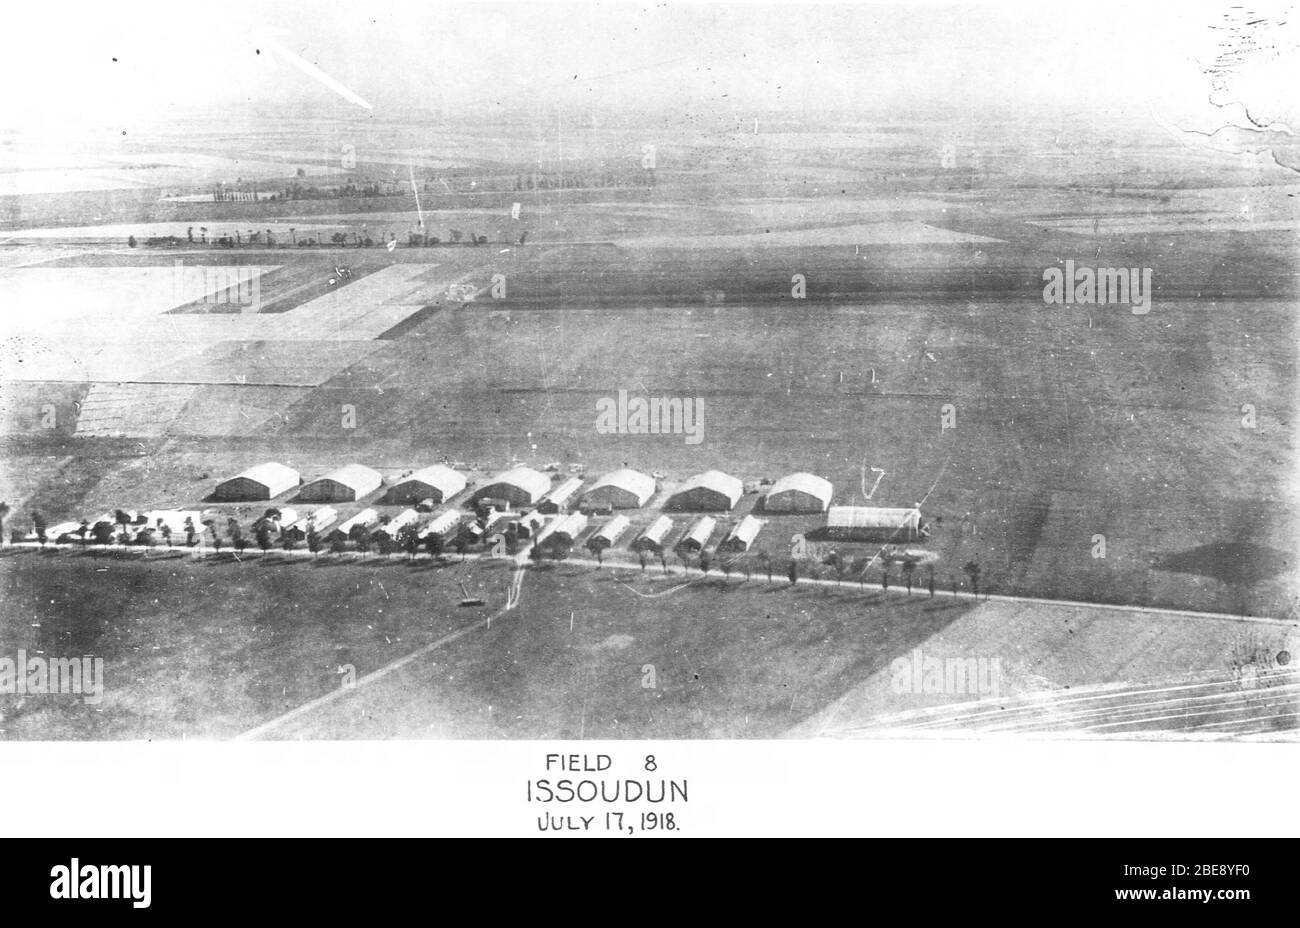 'English: 3d AIC -Field 8 oblique; 1918; Air Service, United States Army photograph, Gorrell's History of the American Expeditionary Forces Air Service, Series J Training, Volume 9, History of the 3d Aviation Instruction Center at Issoudun via http://www.fold3.com; Air Service, United States Army photograph; ' Stock Photo